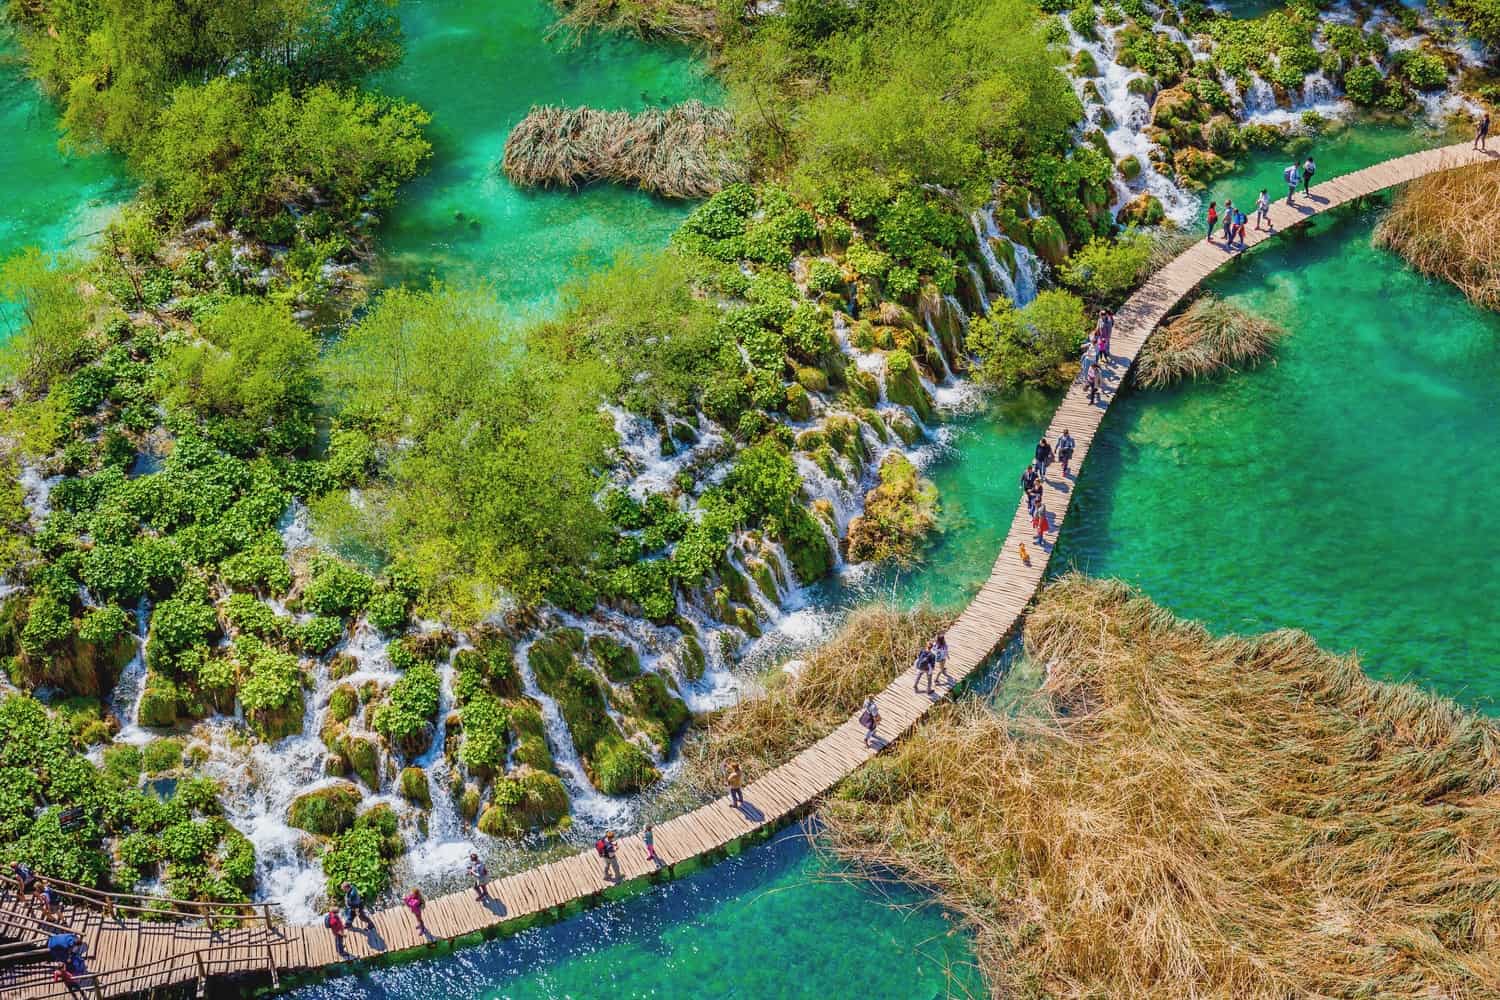 Plitvice Lakes from above with people on the walkway. Many small waterfalls are visible alongside the walkway.